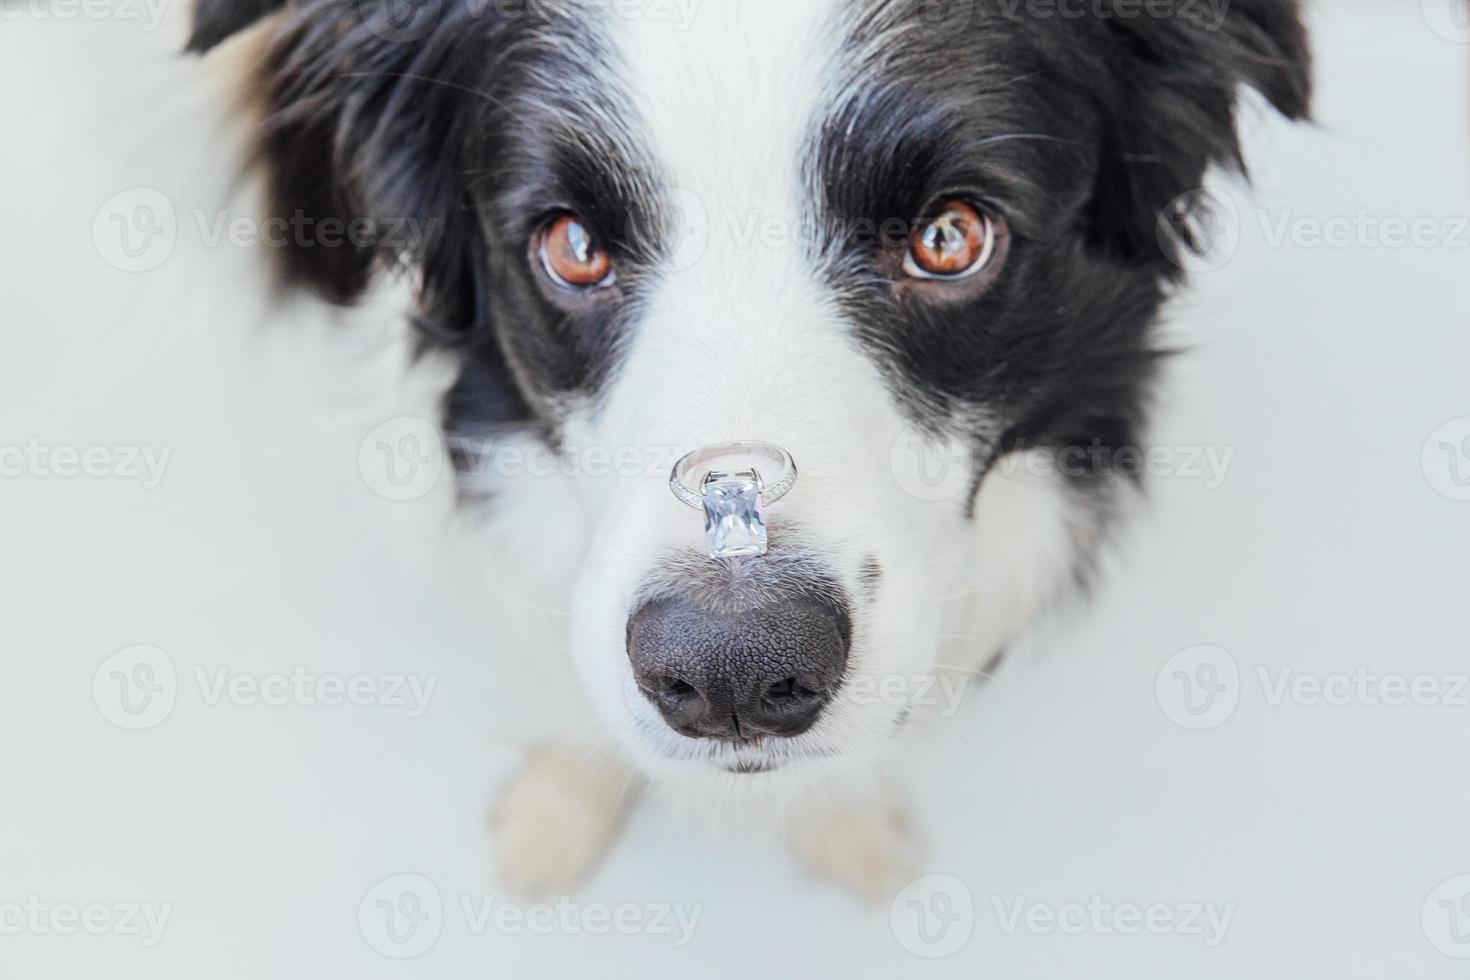 Will you marry me. Funny portrait of cute puppy dog border collie holding wedding ring on nose isolated on white background. Engagement, marriage, proposal concept photo